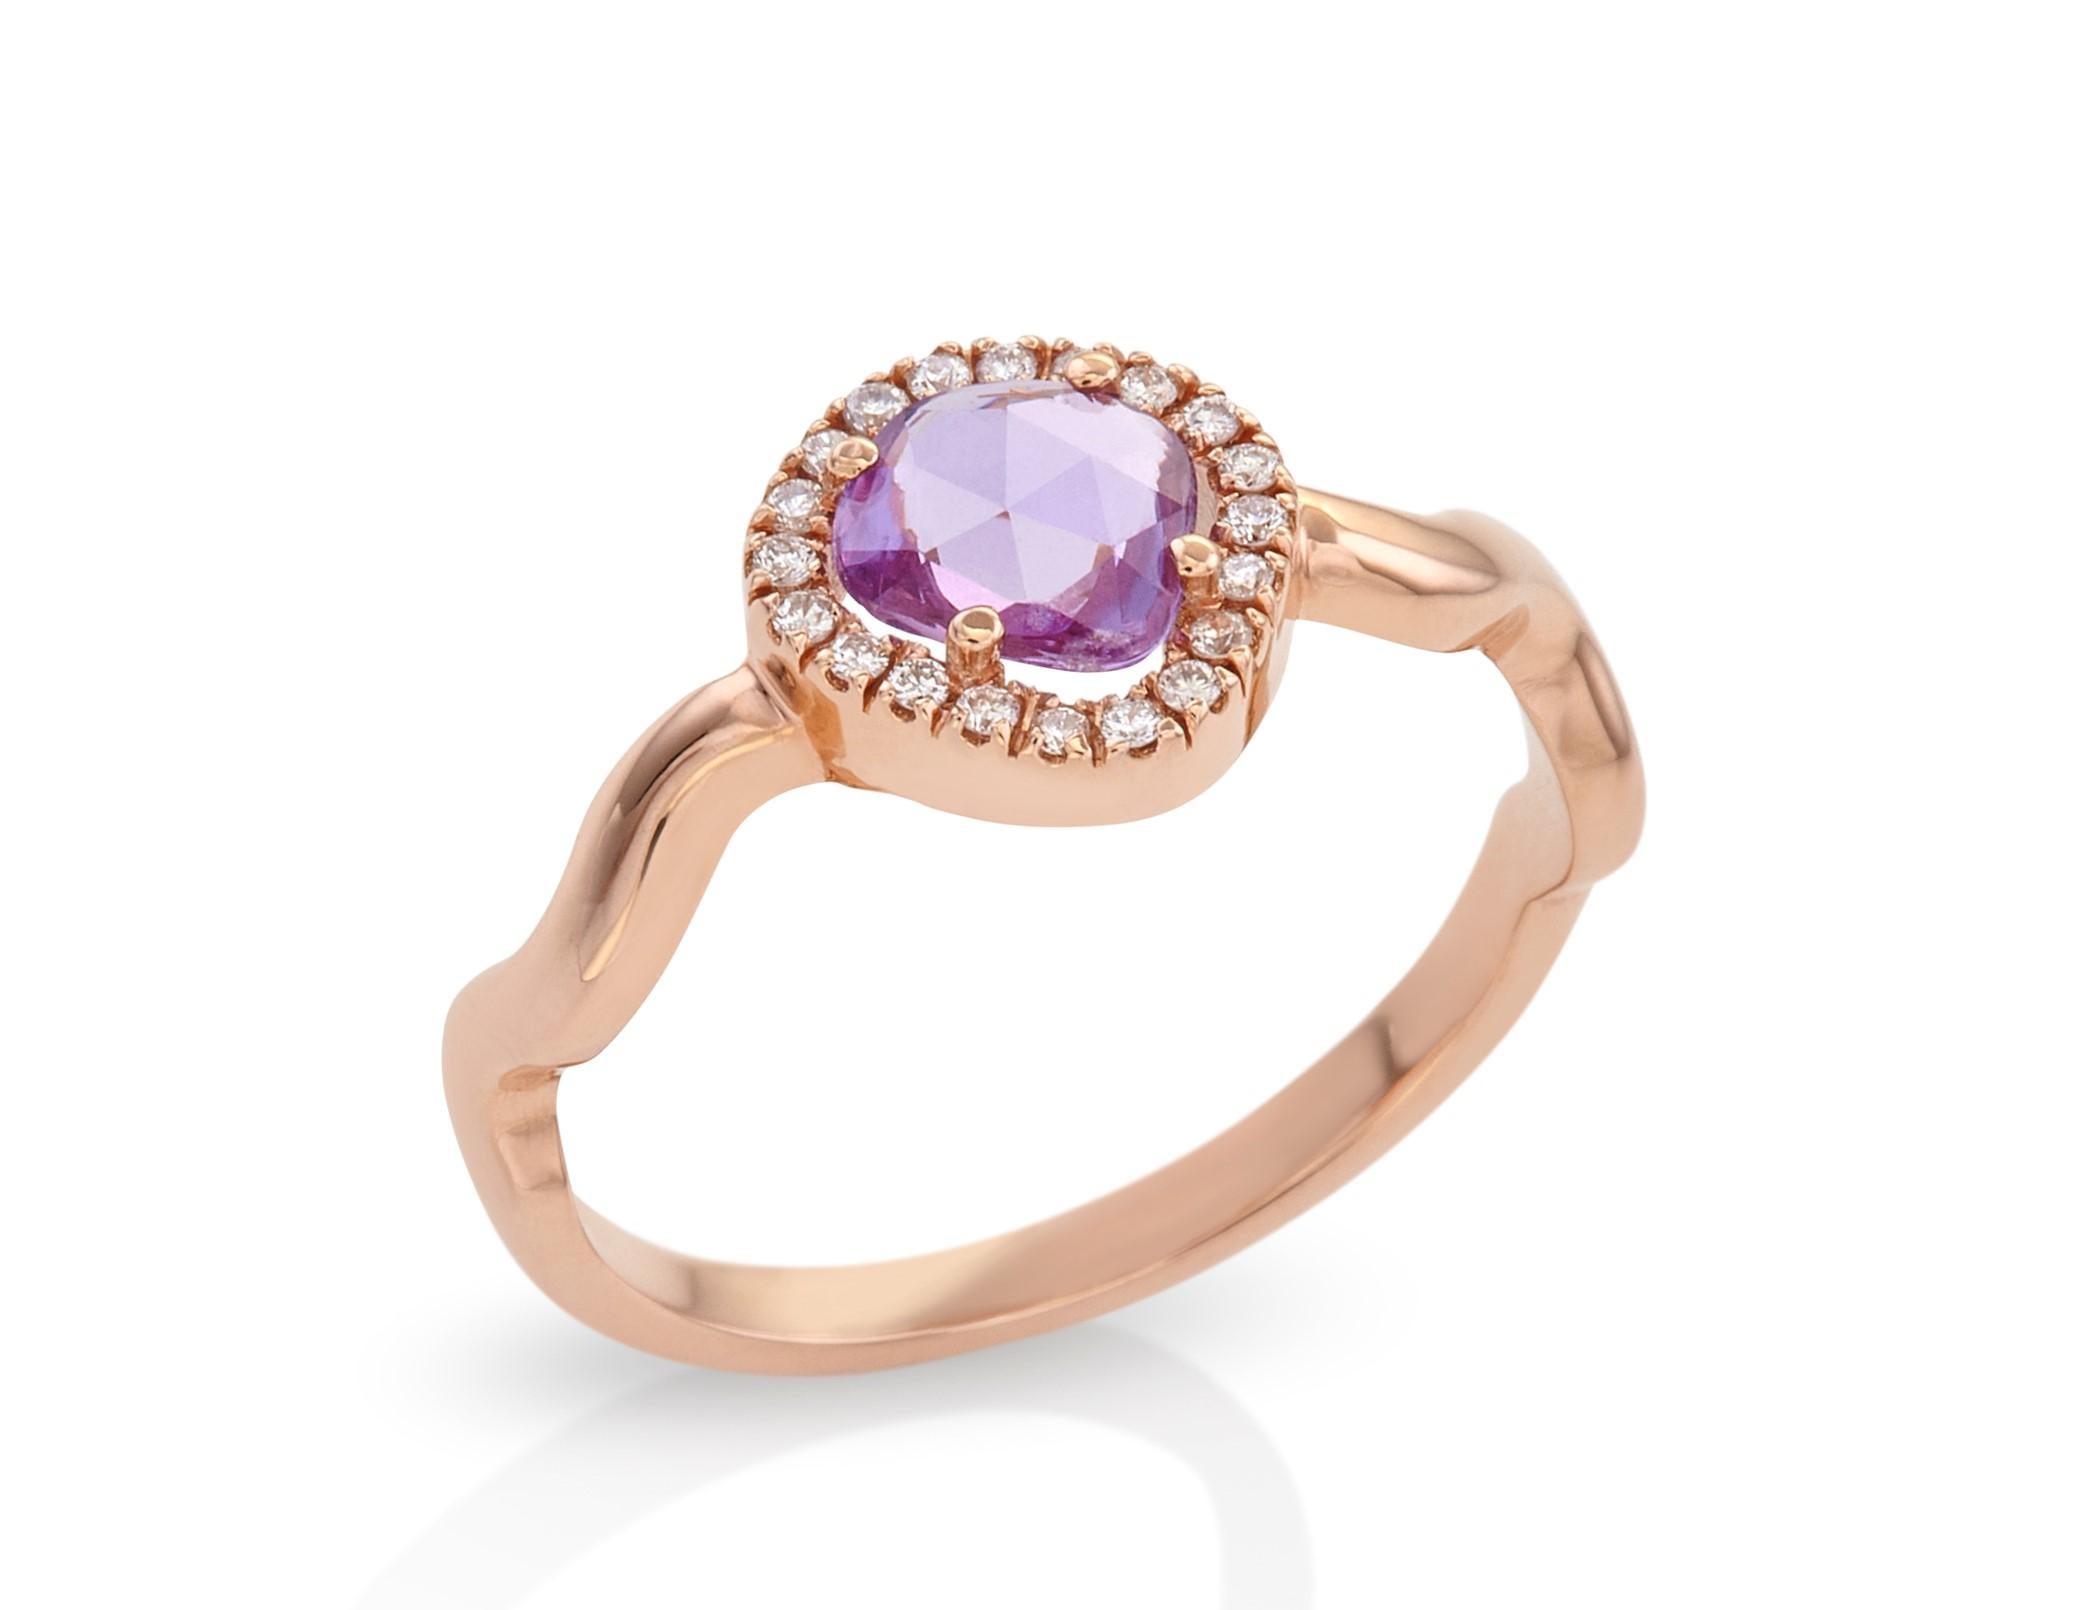 For Sale:  Zic Zac Ring in 18Kt Rose Gold with Pink, Violet Rose Cut Sapphire and Diamond 4